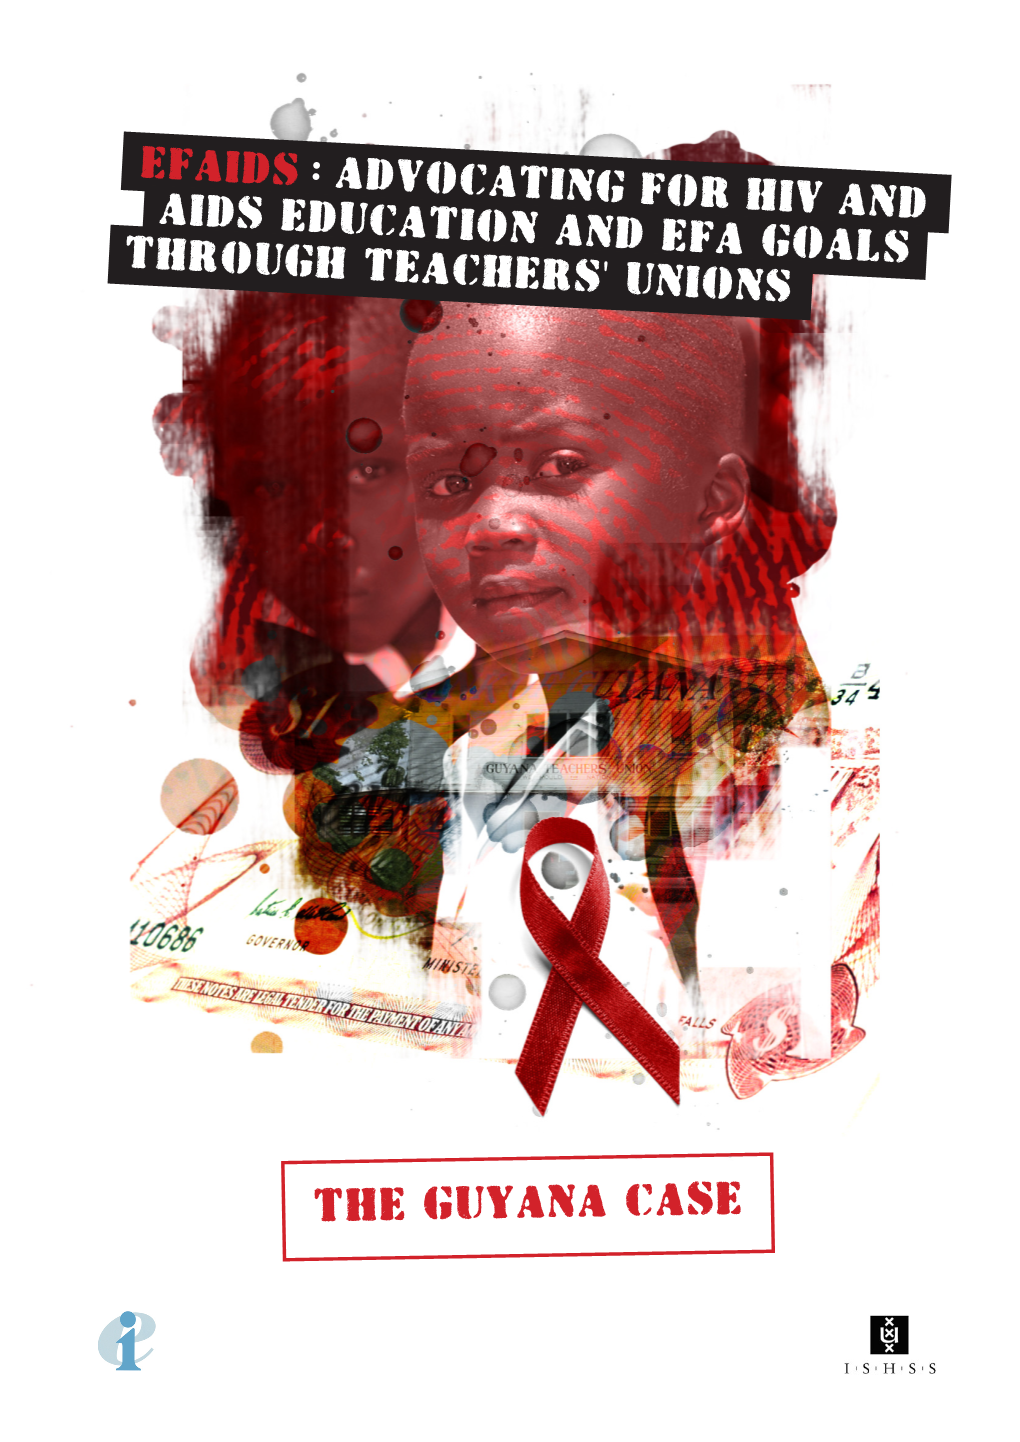 The Guyana Case EFAIDS : Advocating for HIV and AIDS Education and EFA Goals Through Teachers' Unions